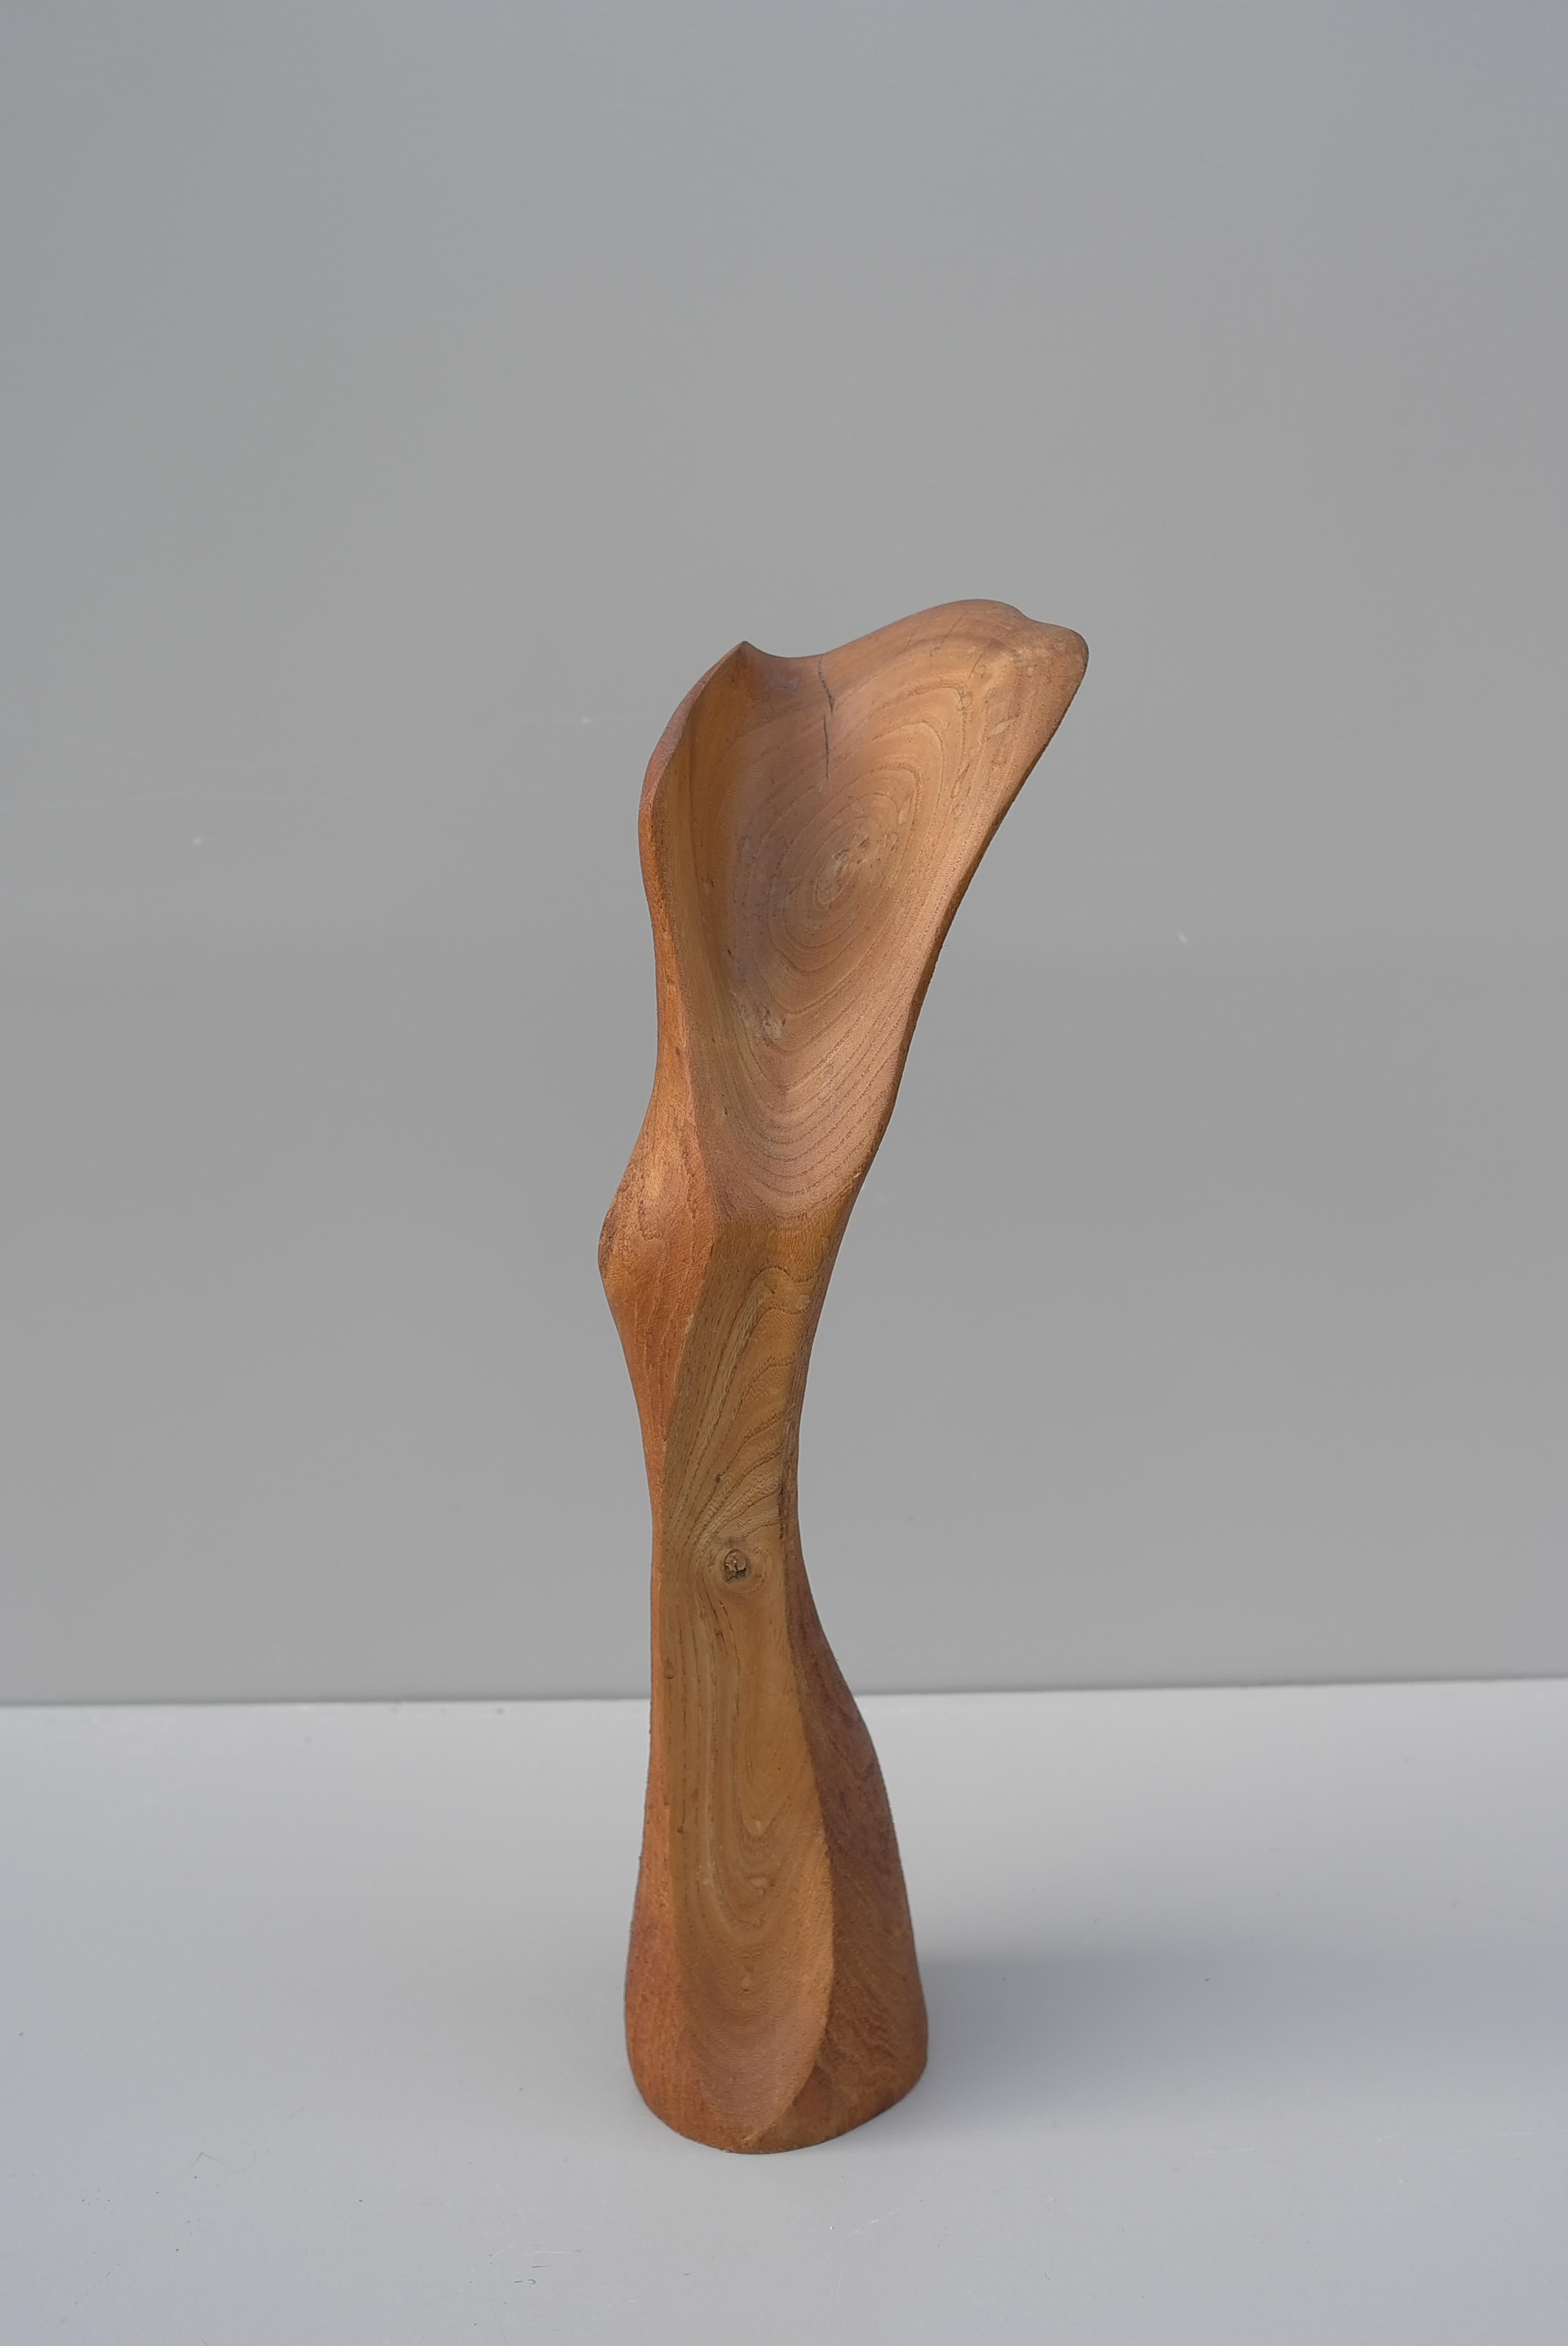  Abstract Mid-Century Modern Organic Wooden Sculpture, 1960's For Sale 6